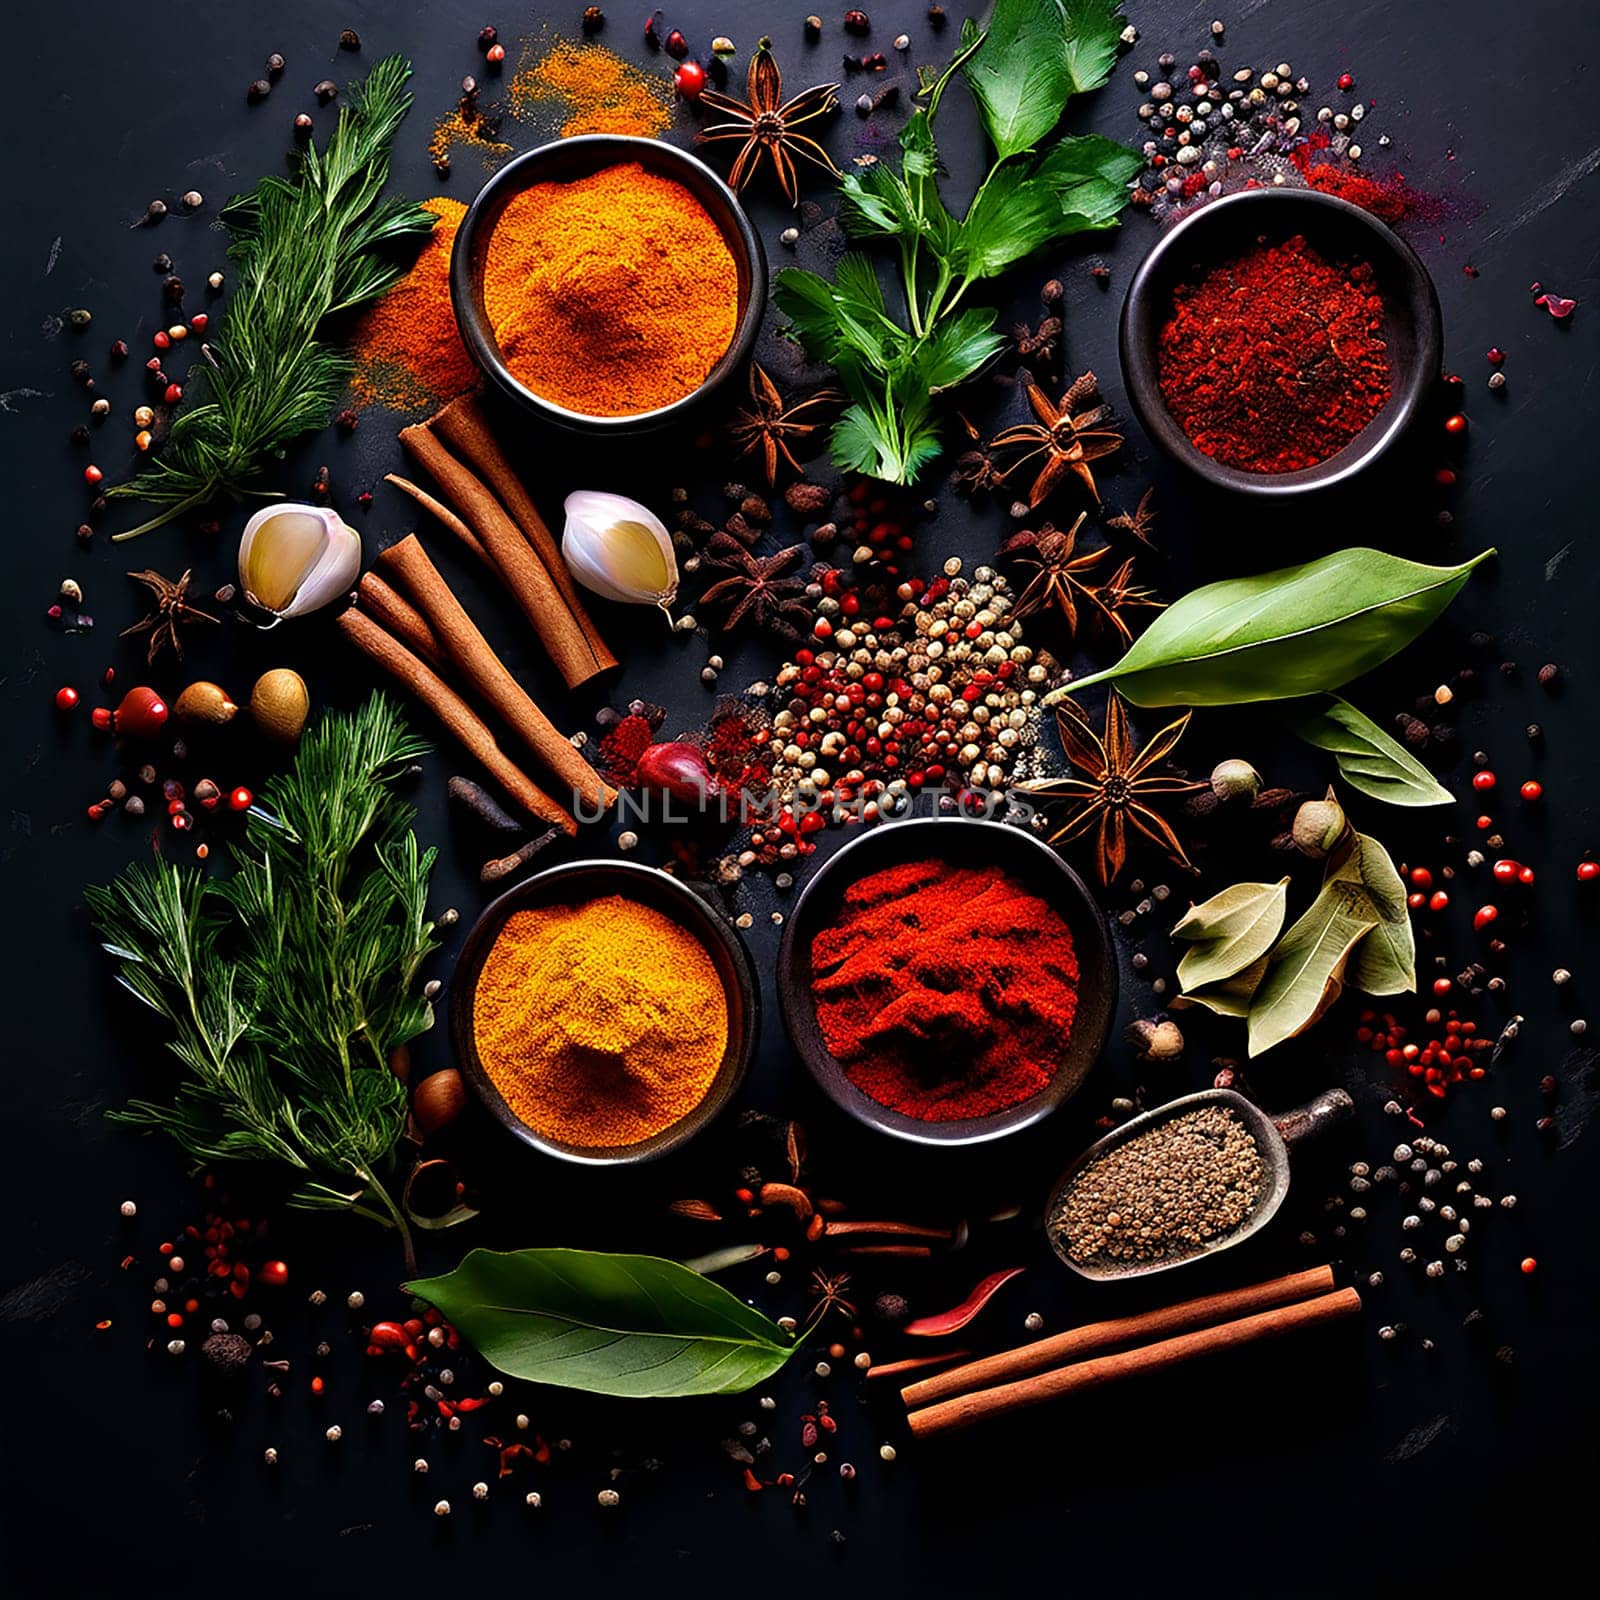 Aromatic Medley: Various Herbs and Spices for Cooking Inspiration by Petrichor